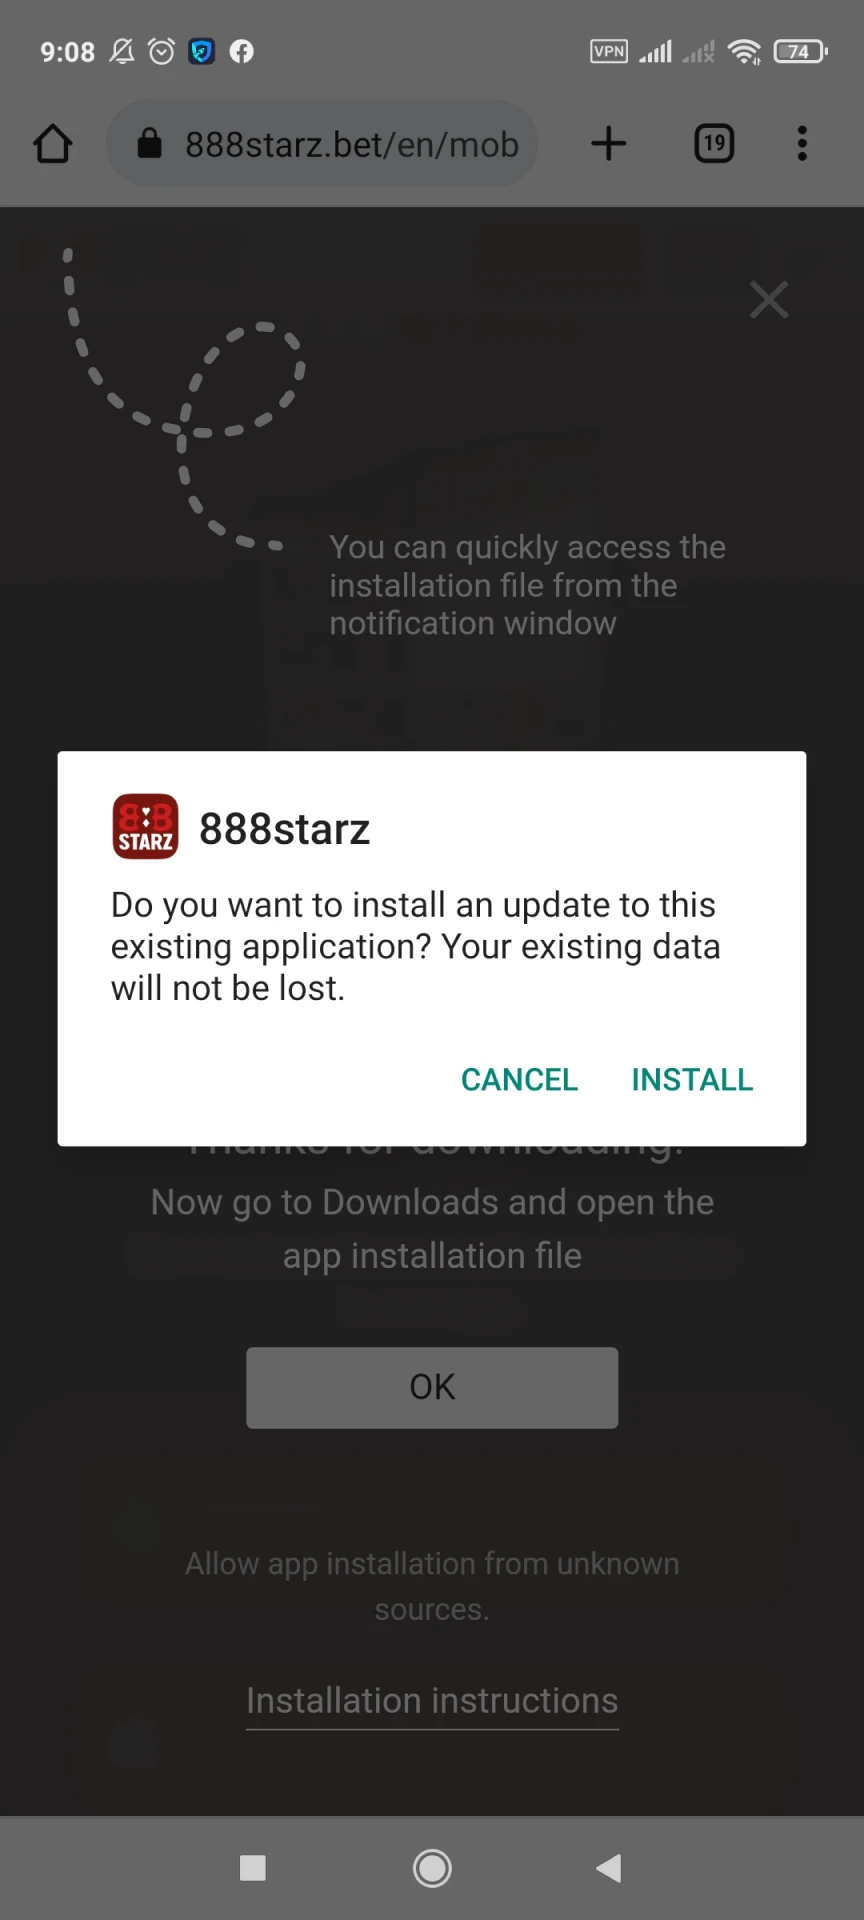 Install the 888starz app for Android.